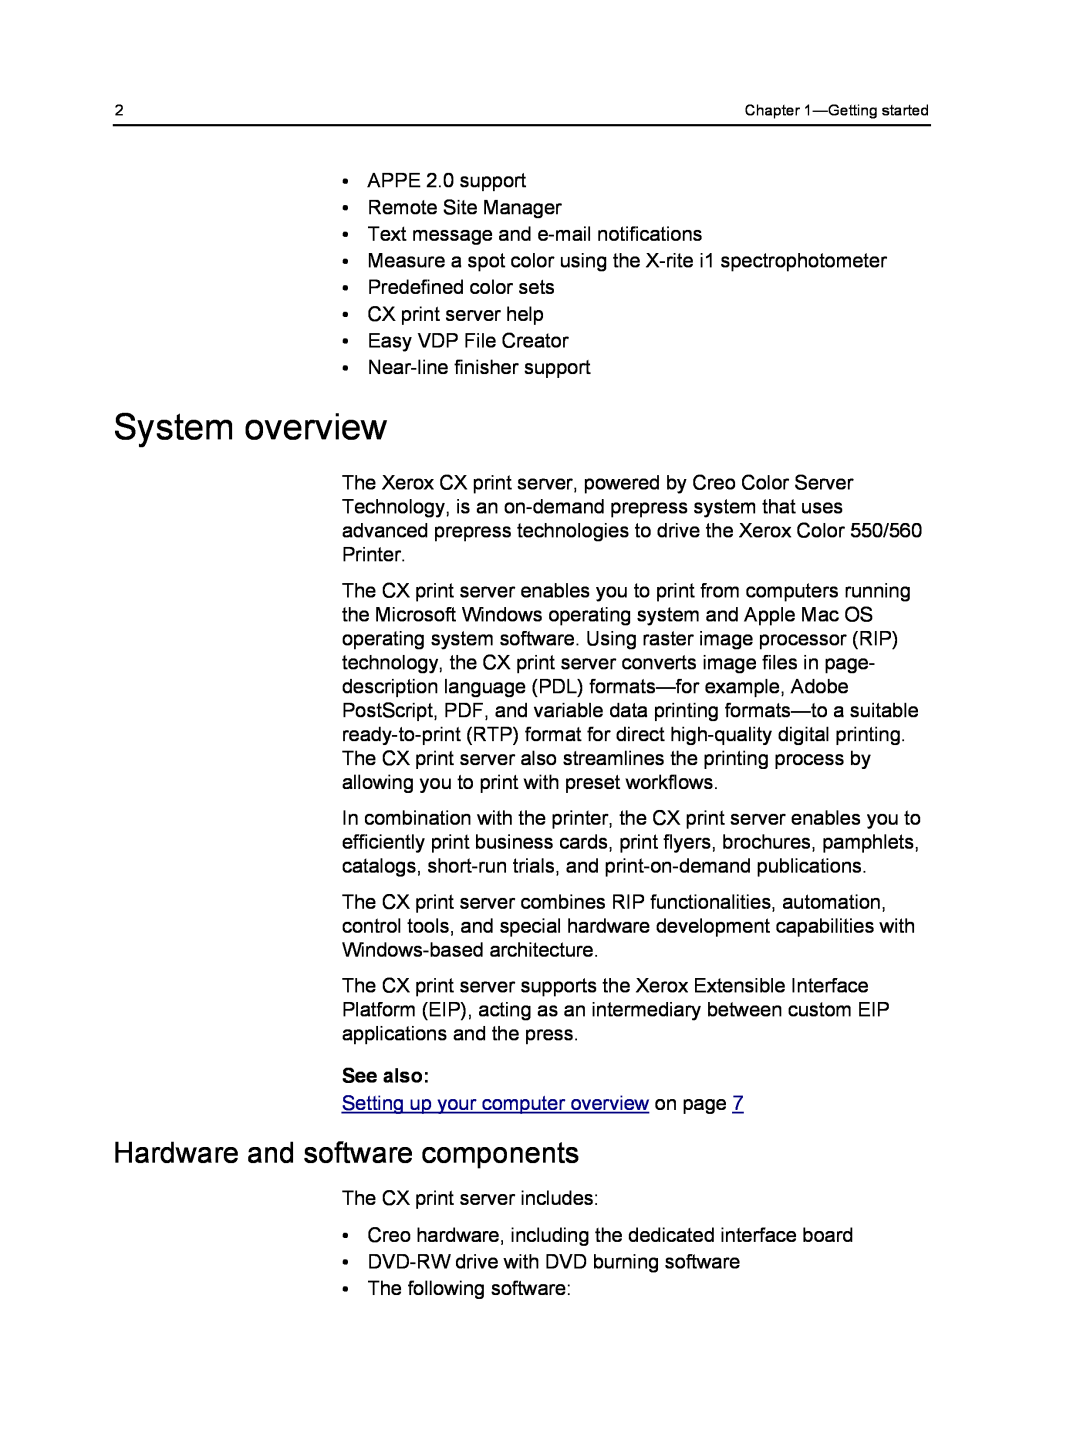 Xerox 560, 550 manual System overview, Hardware and software components, See also 